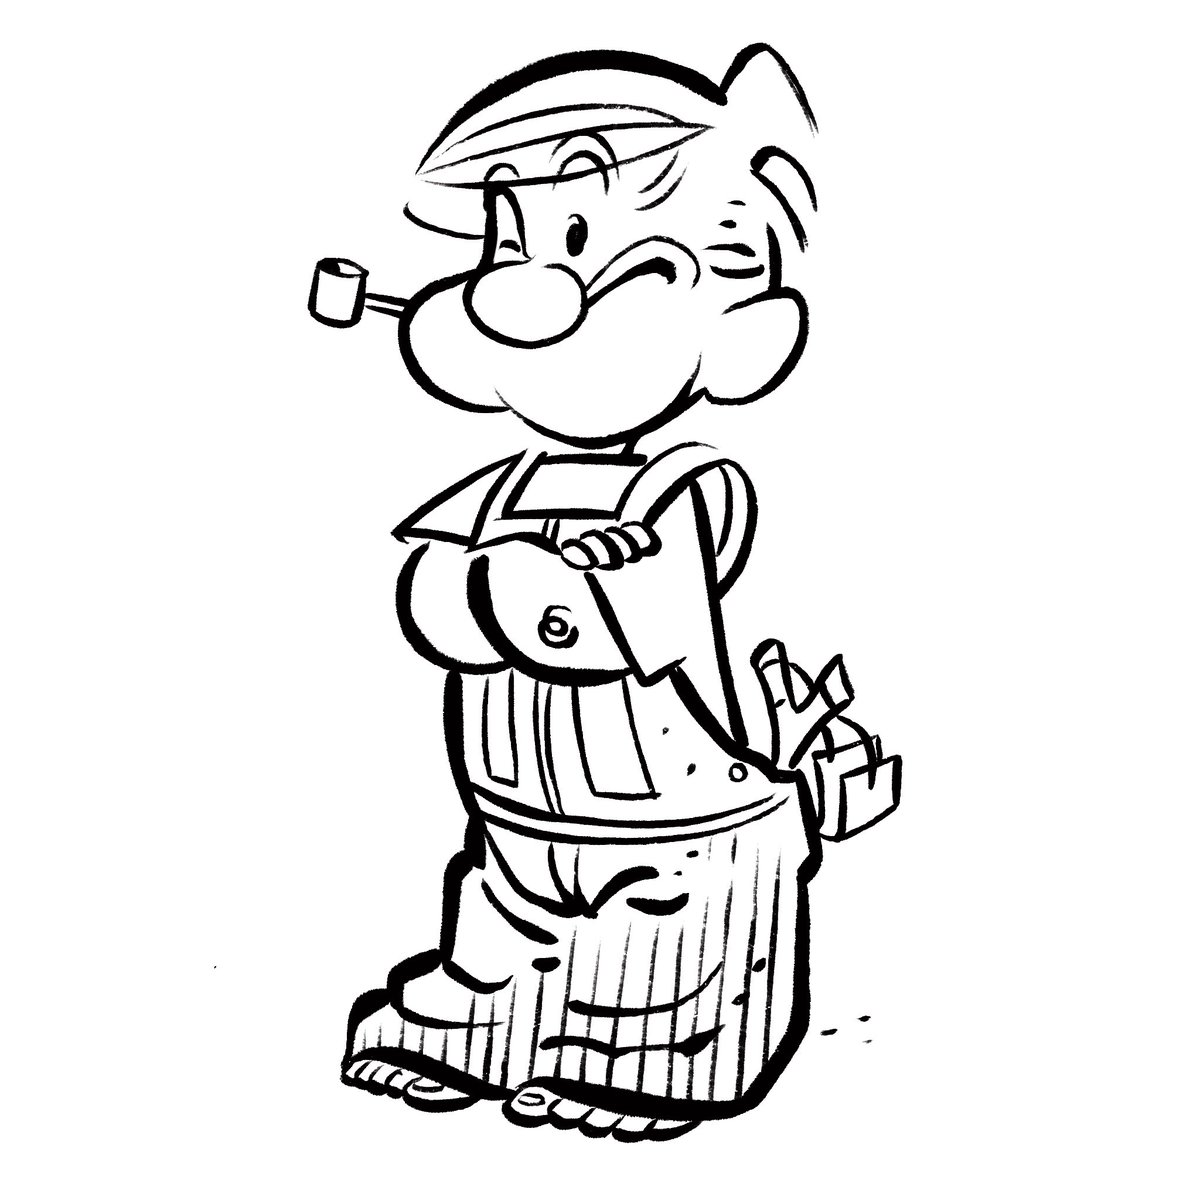 Everyone is asking: “Is there any comic character that isn’t improved by adding Popeye?”No. No there isn’t.